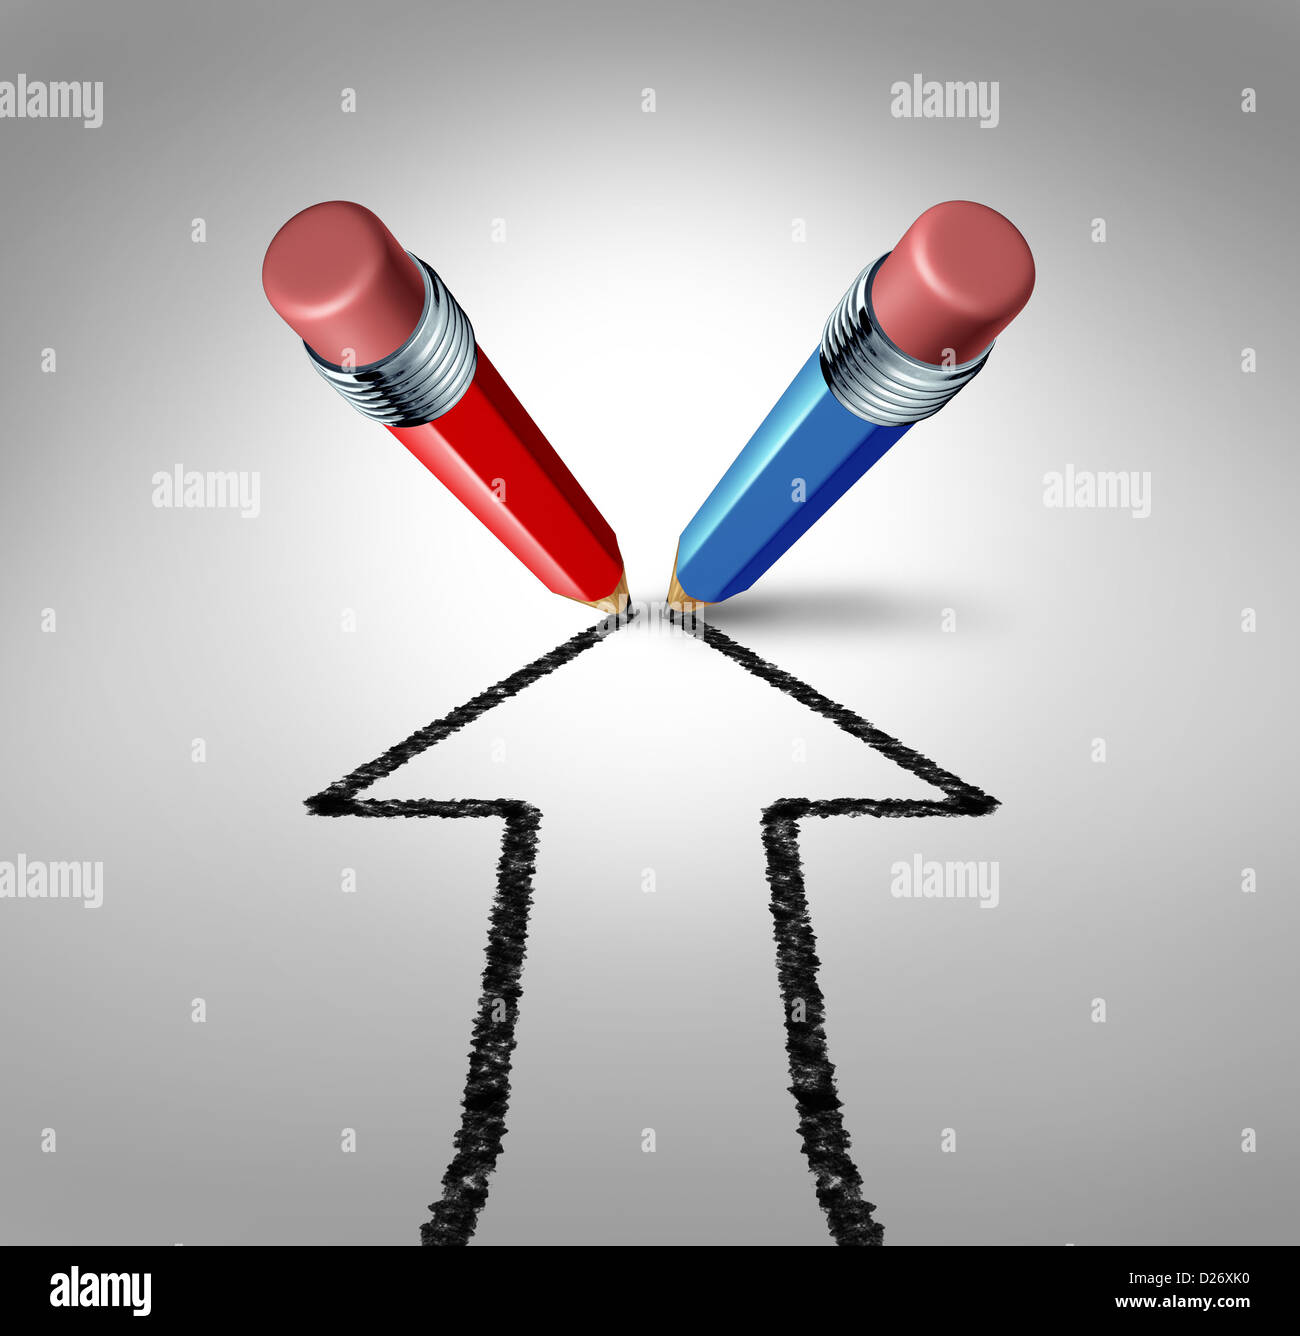 Group goals and joining forces together as a team partnership for business success as a red and blue pencil drawing an arrow Stock Photo